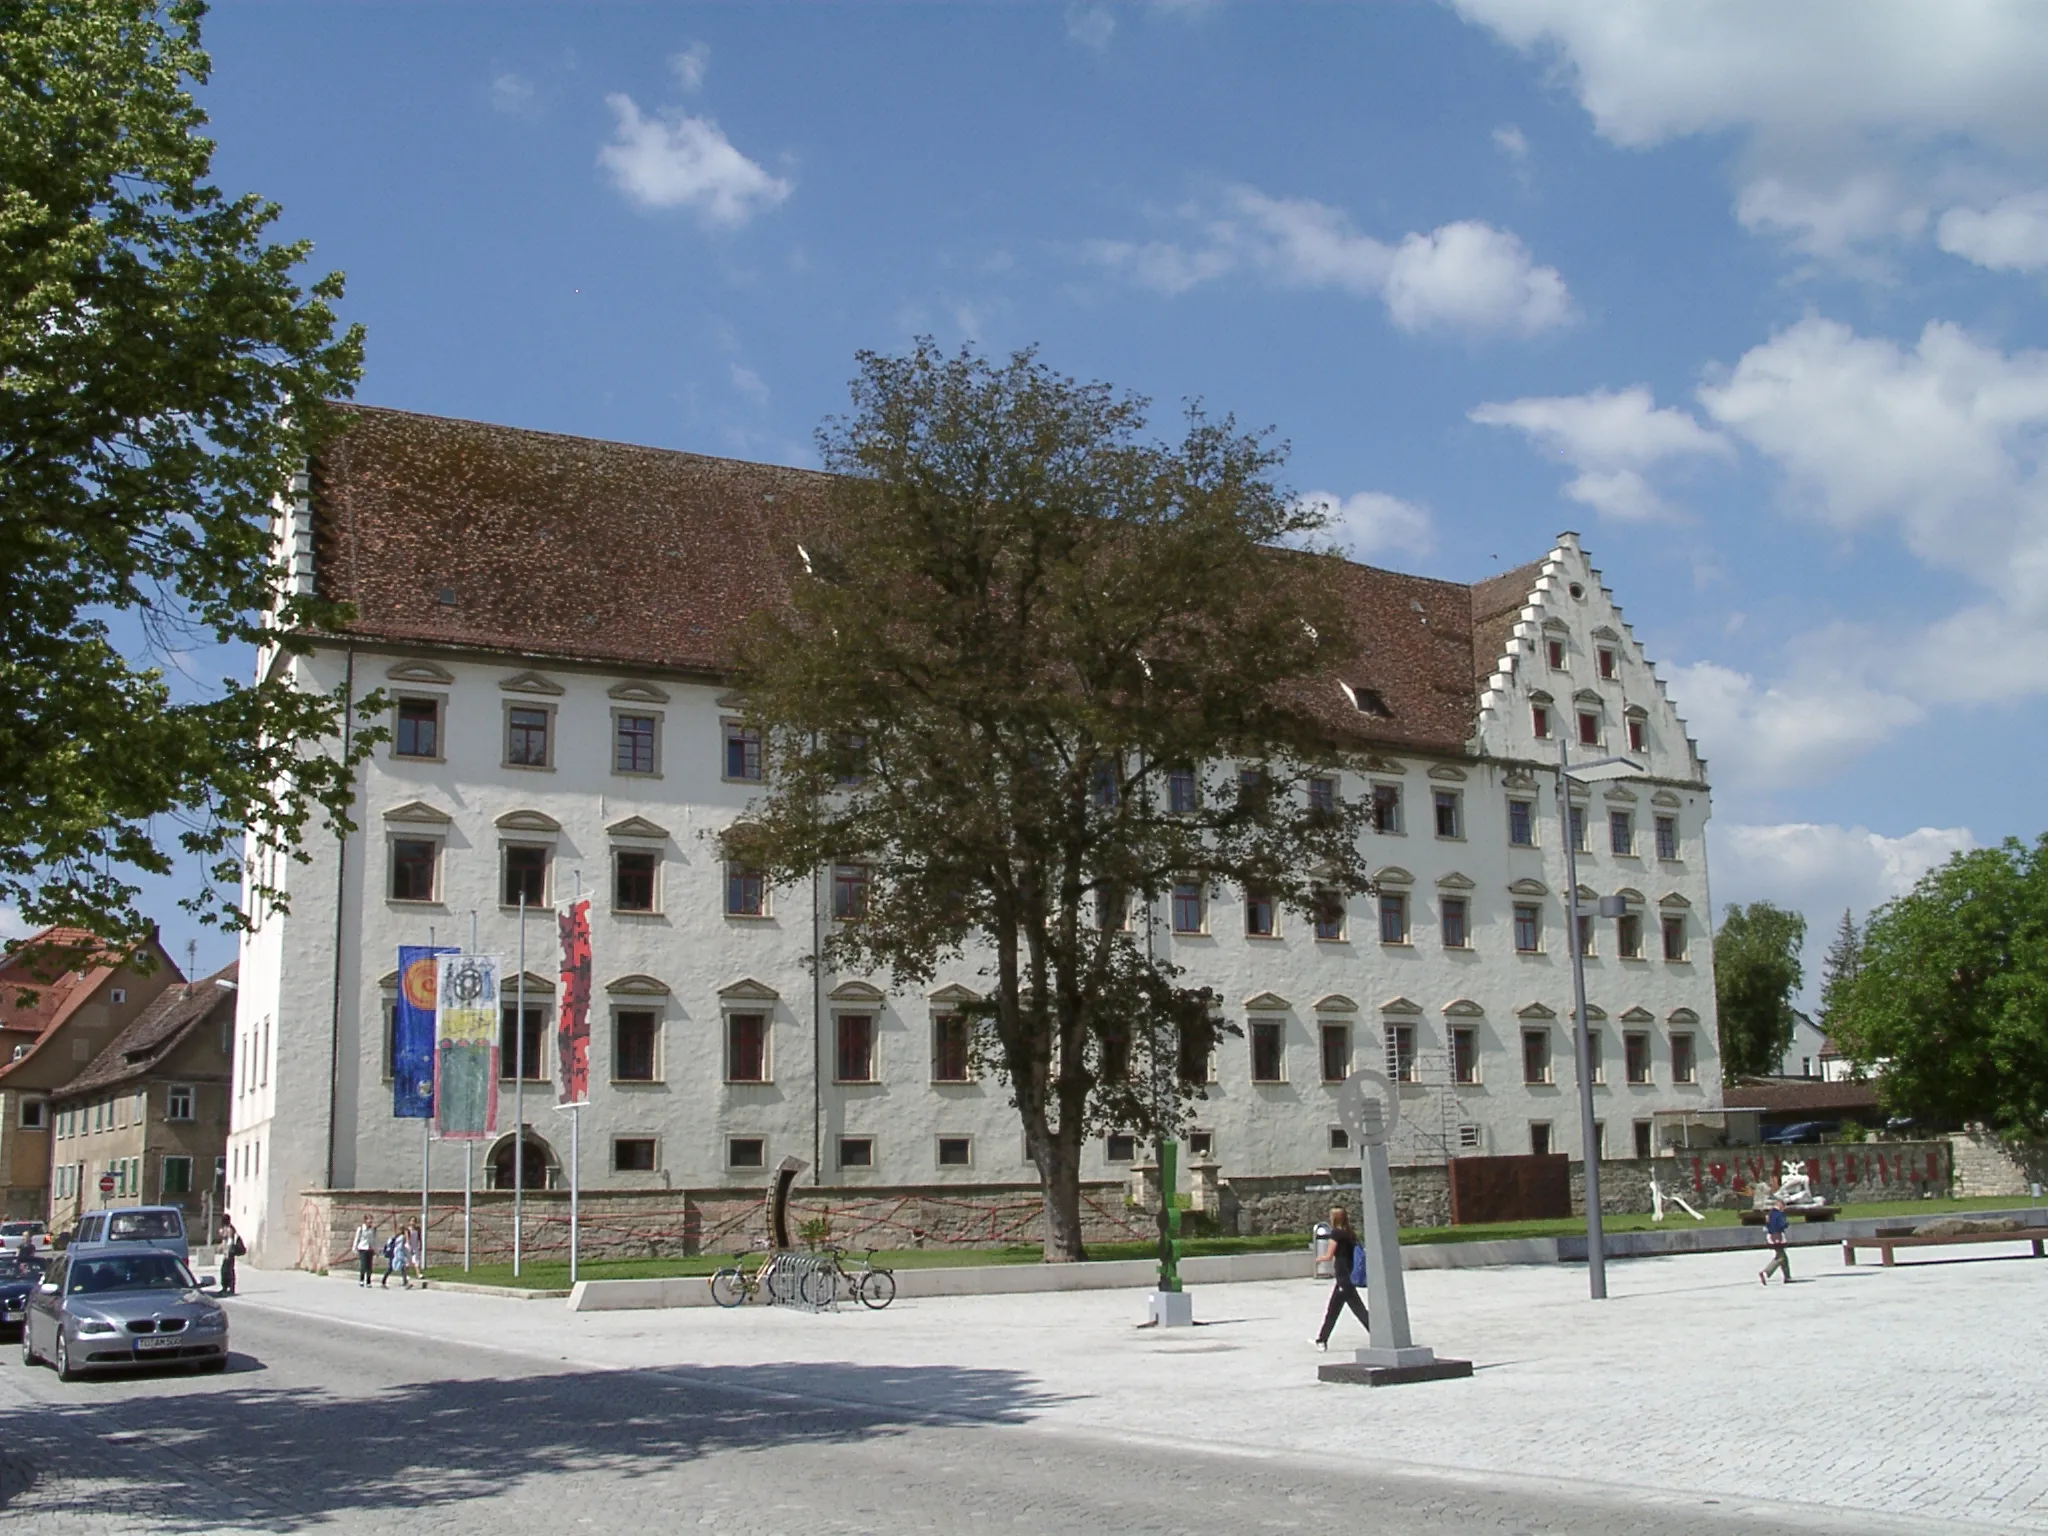 Photo showing: Episcopal mansion at the Eugen-Bolz-Square in Rottenburg am Neckar (District of Tübingen, State of Baden-Württemberg, Germany). The Palace was built in 1657/58 under the Barons of Hohenberg. The building with two wings and remarkable crow-stepped gables served the Jesuit order from 1691 to 1773 as course of lectures with a grammar school. Subsequently it was the domicile of an Austrian authority and from 1806 on it was the domicile of an authority of the Kingdom of Württemberg. When in 1821 the Diocese of Rottenburg was founded the palace became the episcopal administrative centre.